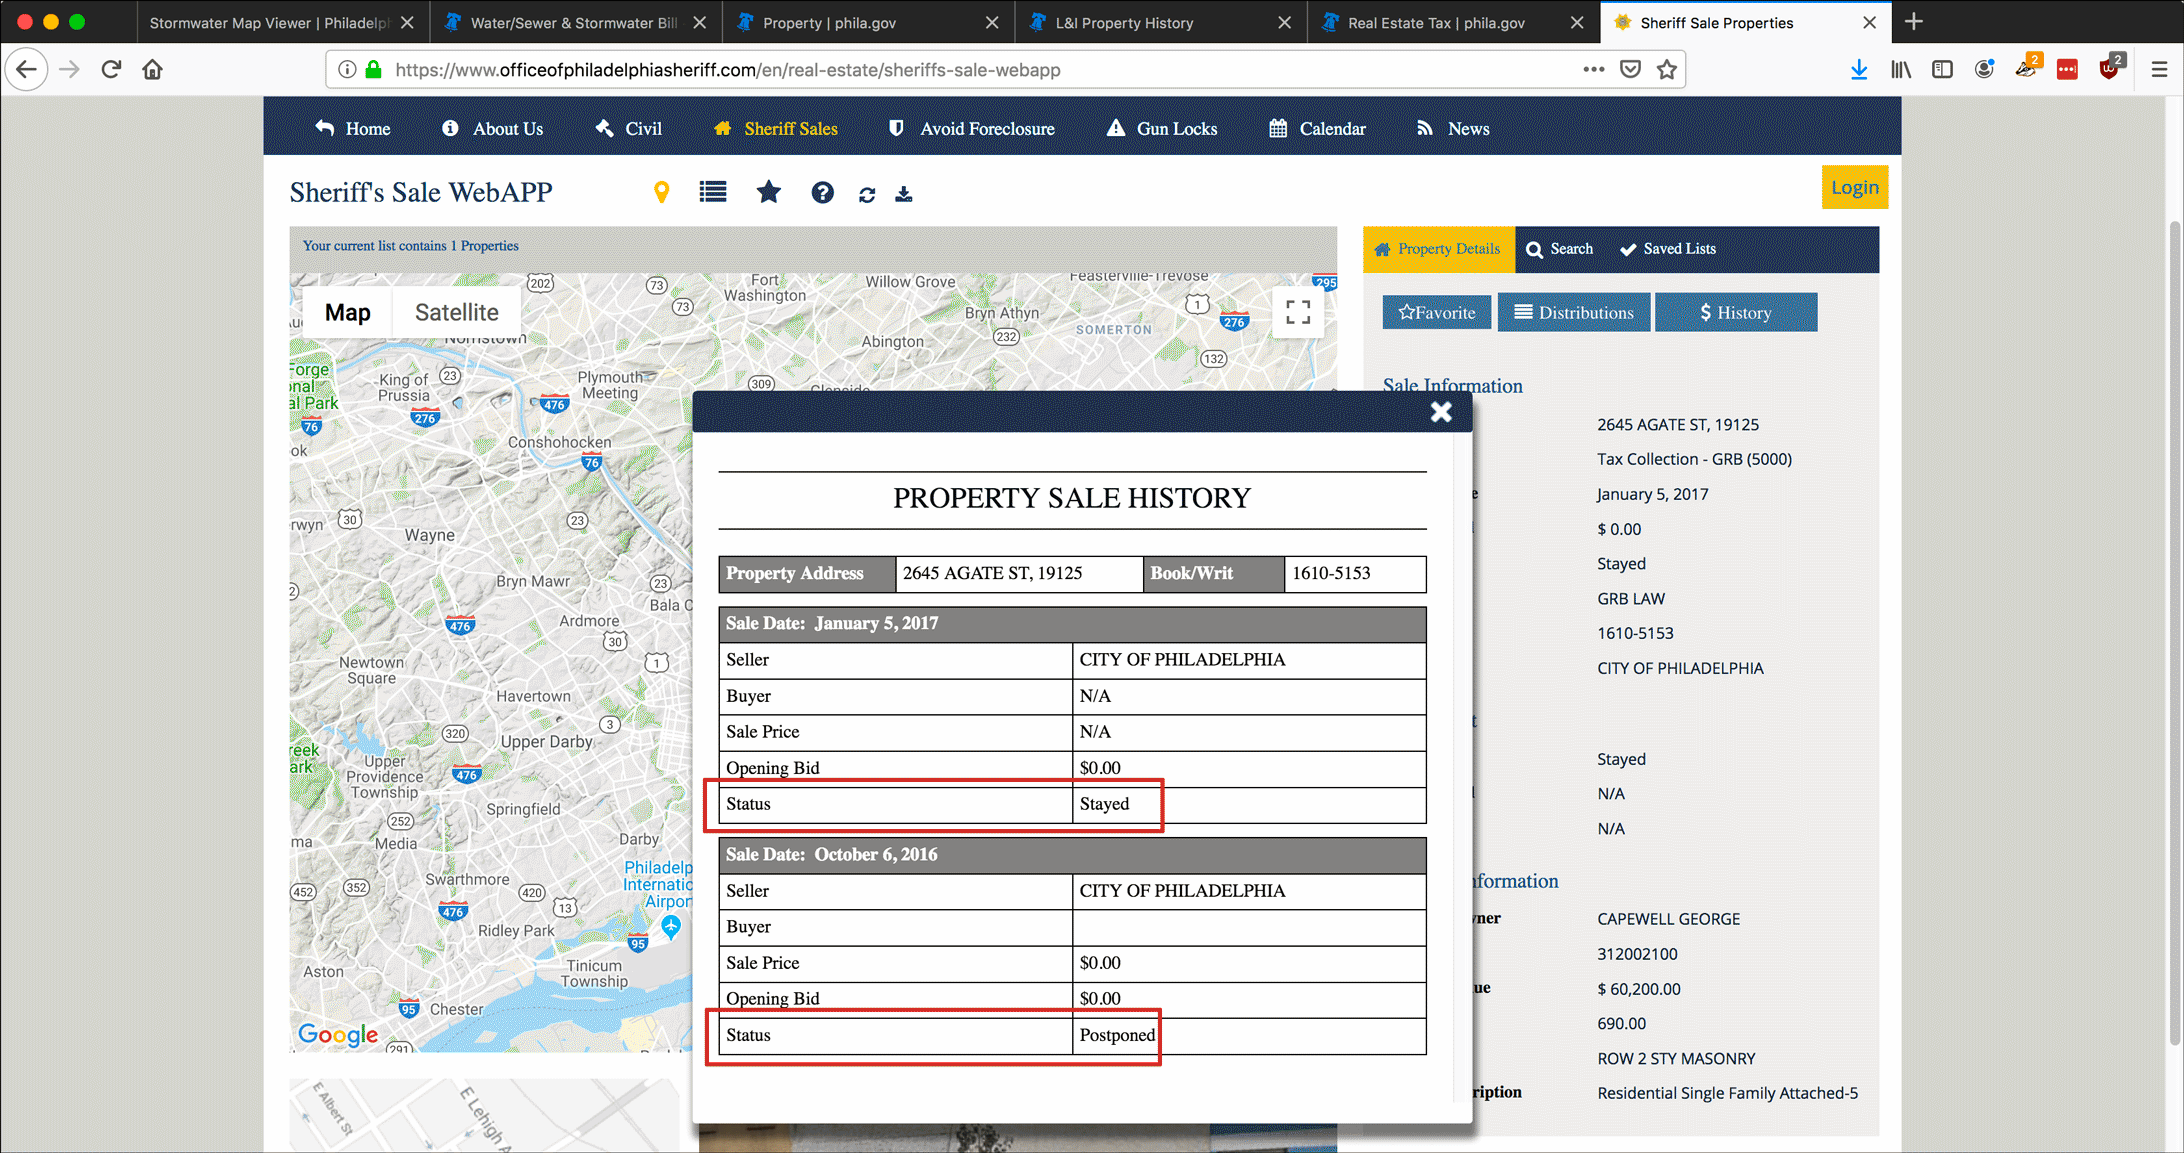 Screenshot illustrating research of property and Sheriff's sale information on the Philadelphia Sheriff's website.